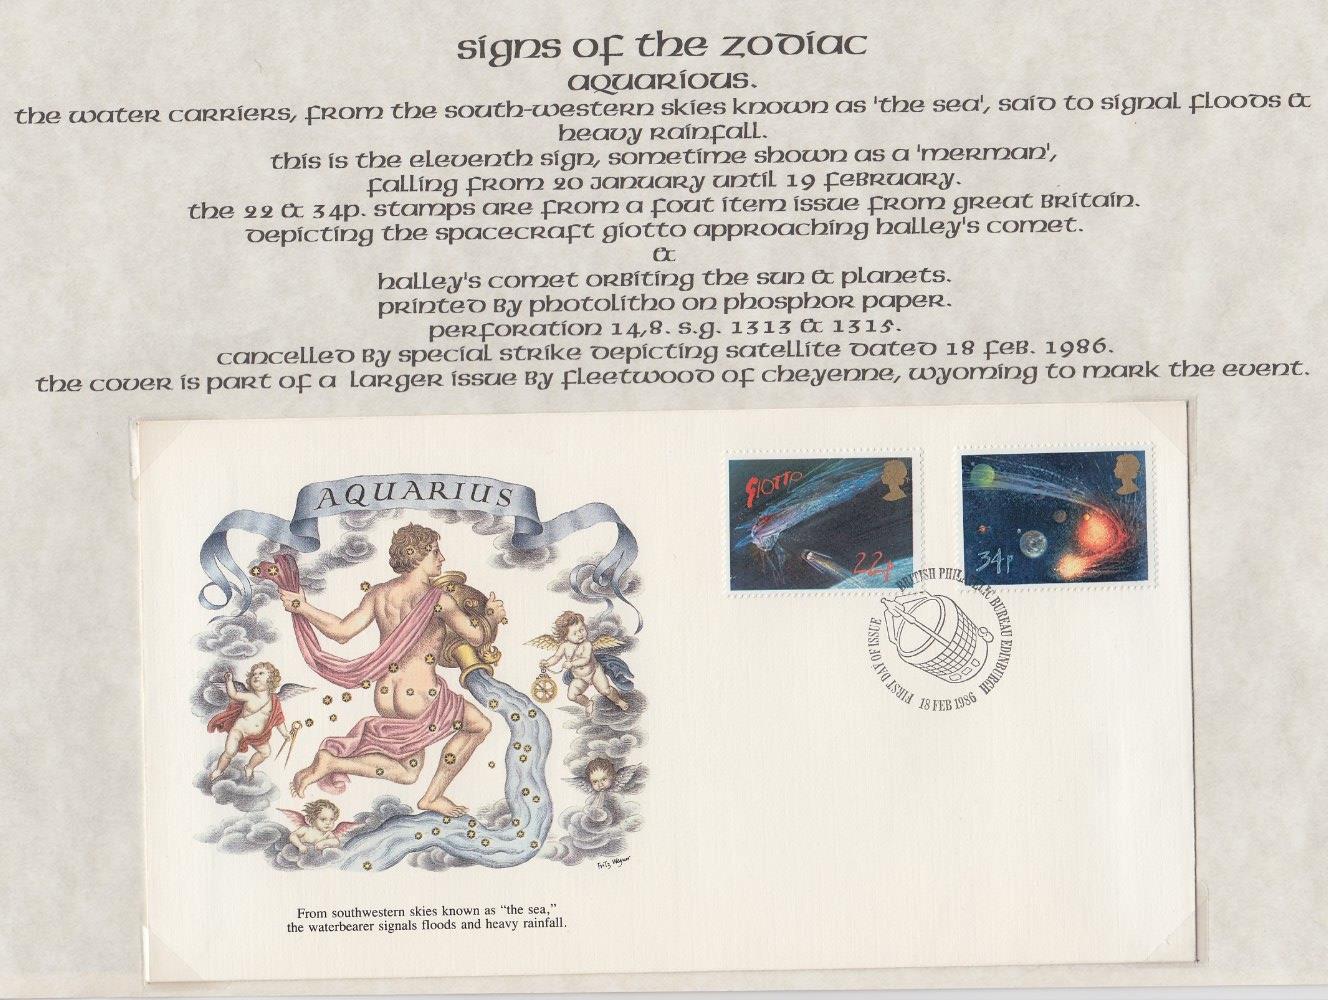 STAMPS ZODIAC, two folders of stamps and covers relating to signs of the zodiac. - Image 2 of 2